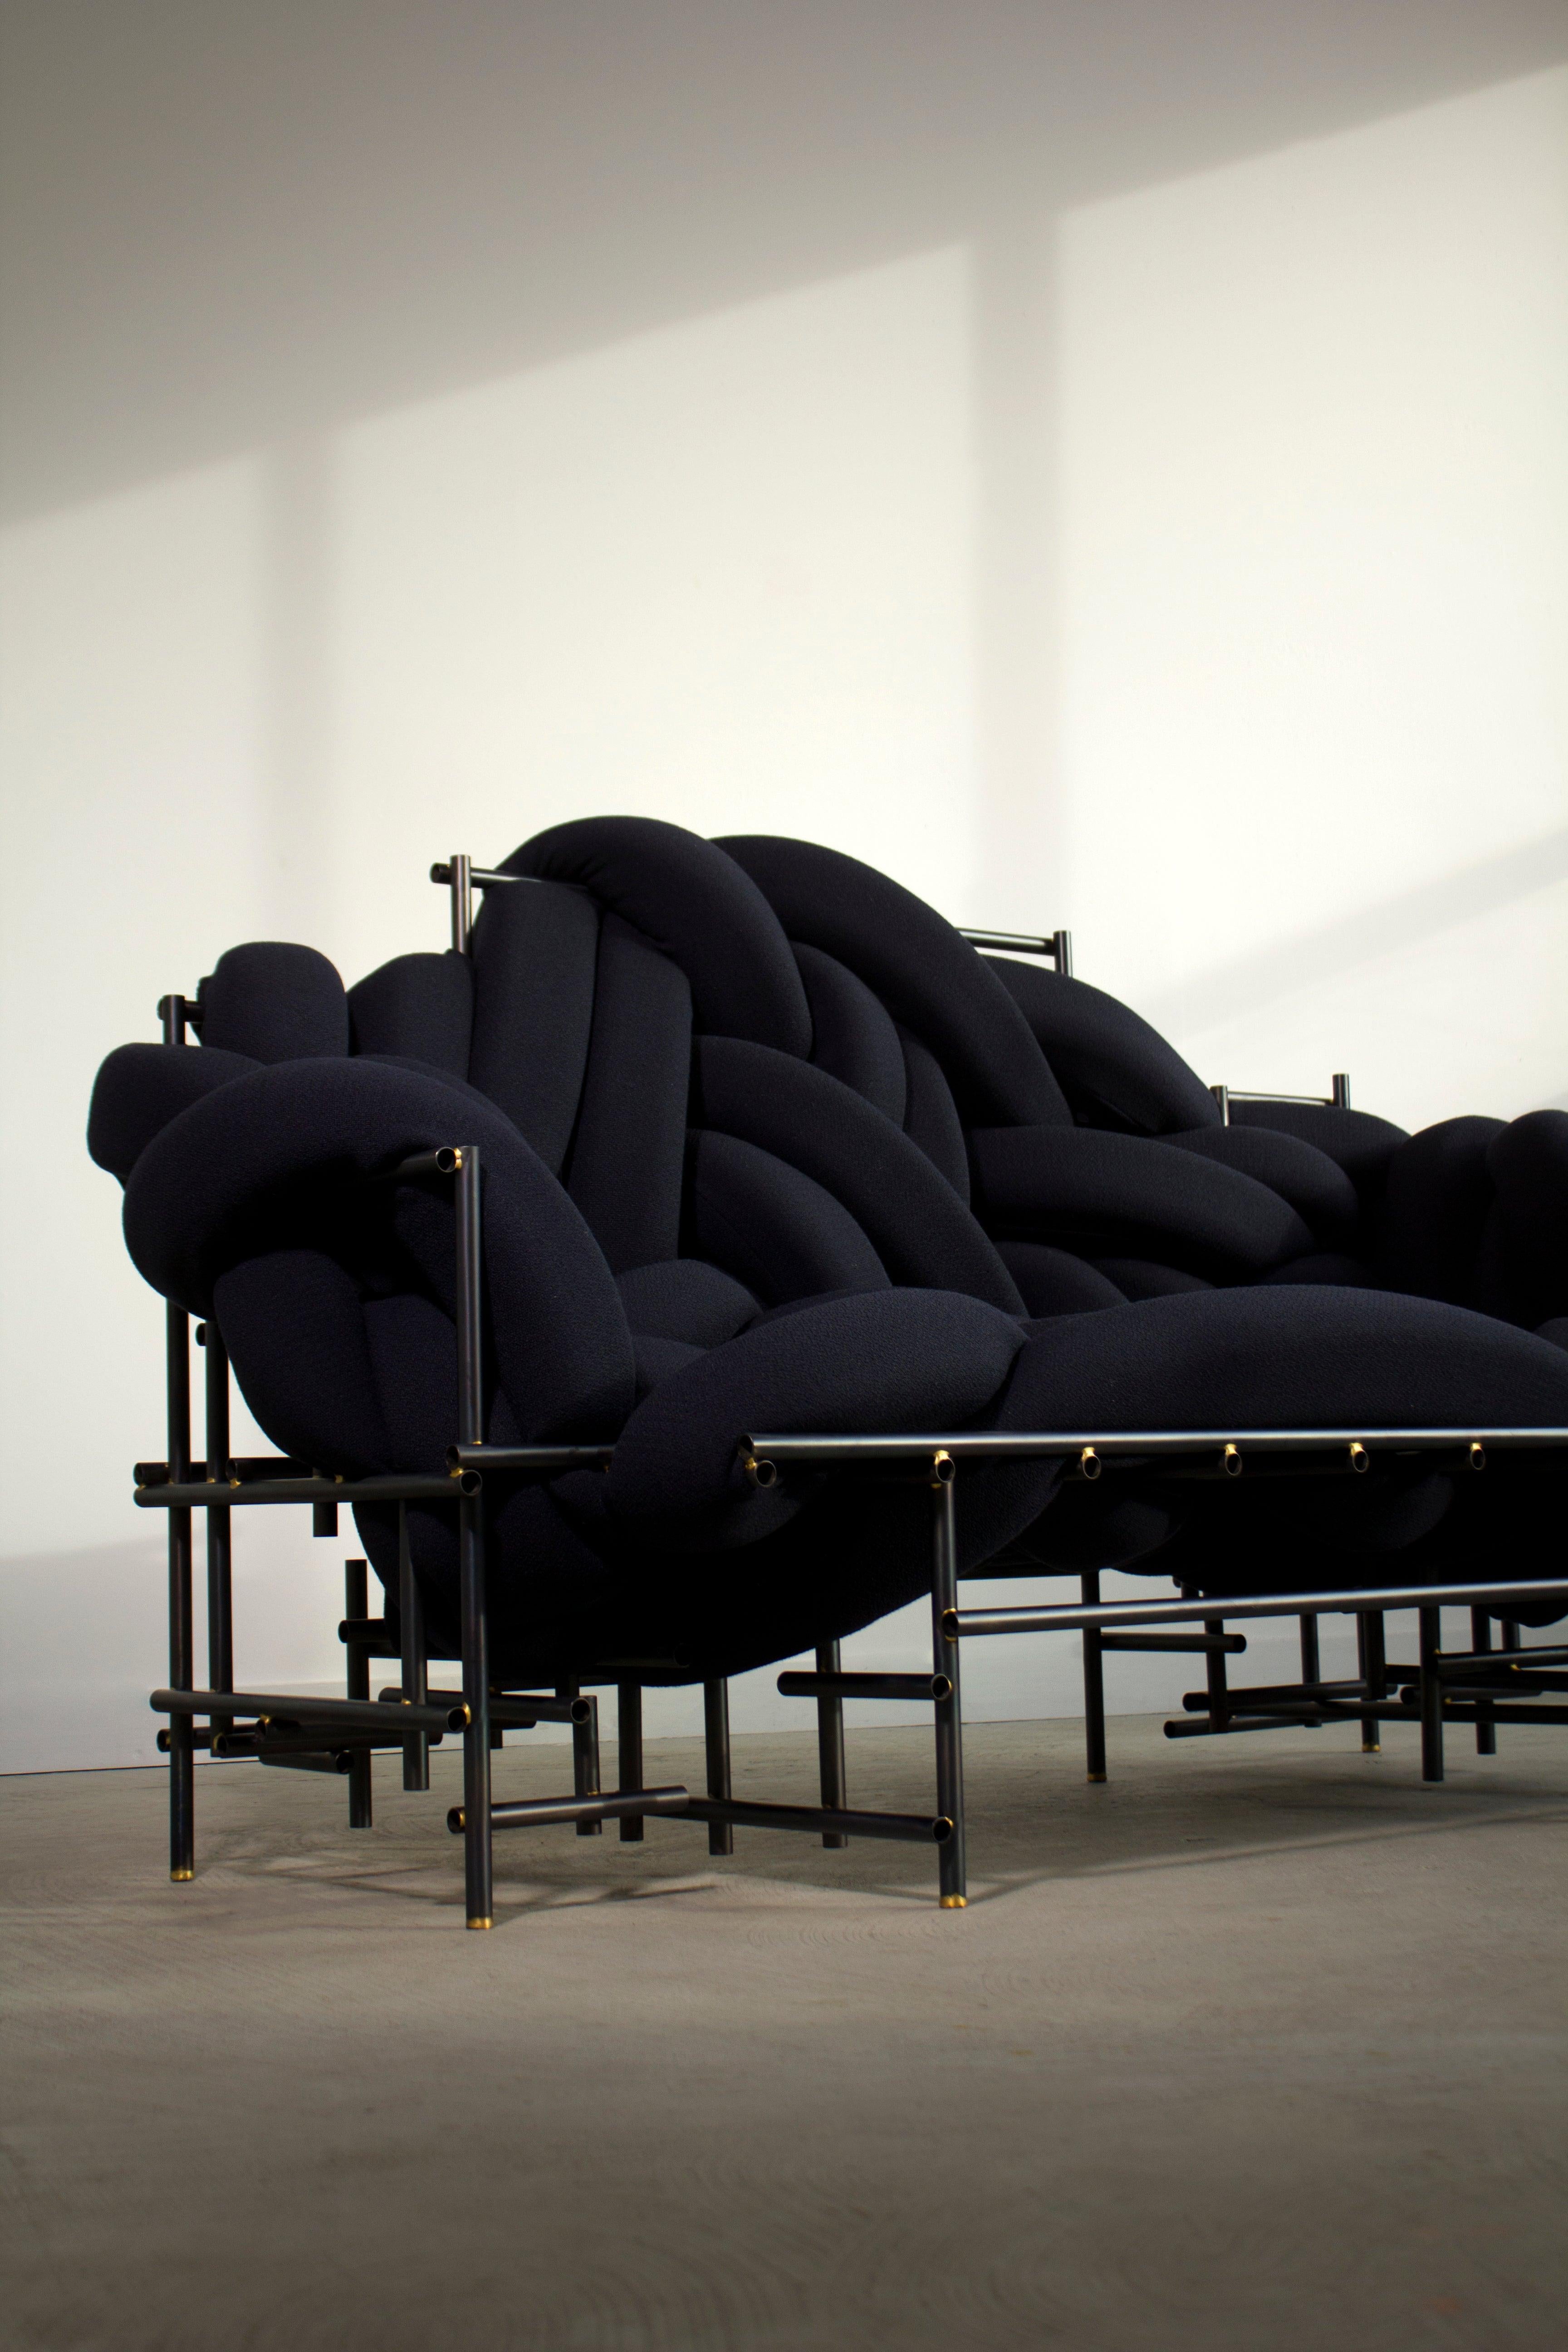 Lawless sofa
Each is a unique hand-sculpted creation by Evan Fay
Dimensions:
W 1676, D 863, H 1016 mm
W 66”, D 34”, H 40” inches (can be made to order in other dimensions)
Materials: Steel, brass, foam, Knoll stretch appeal upholstery